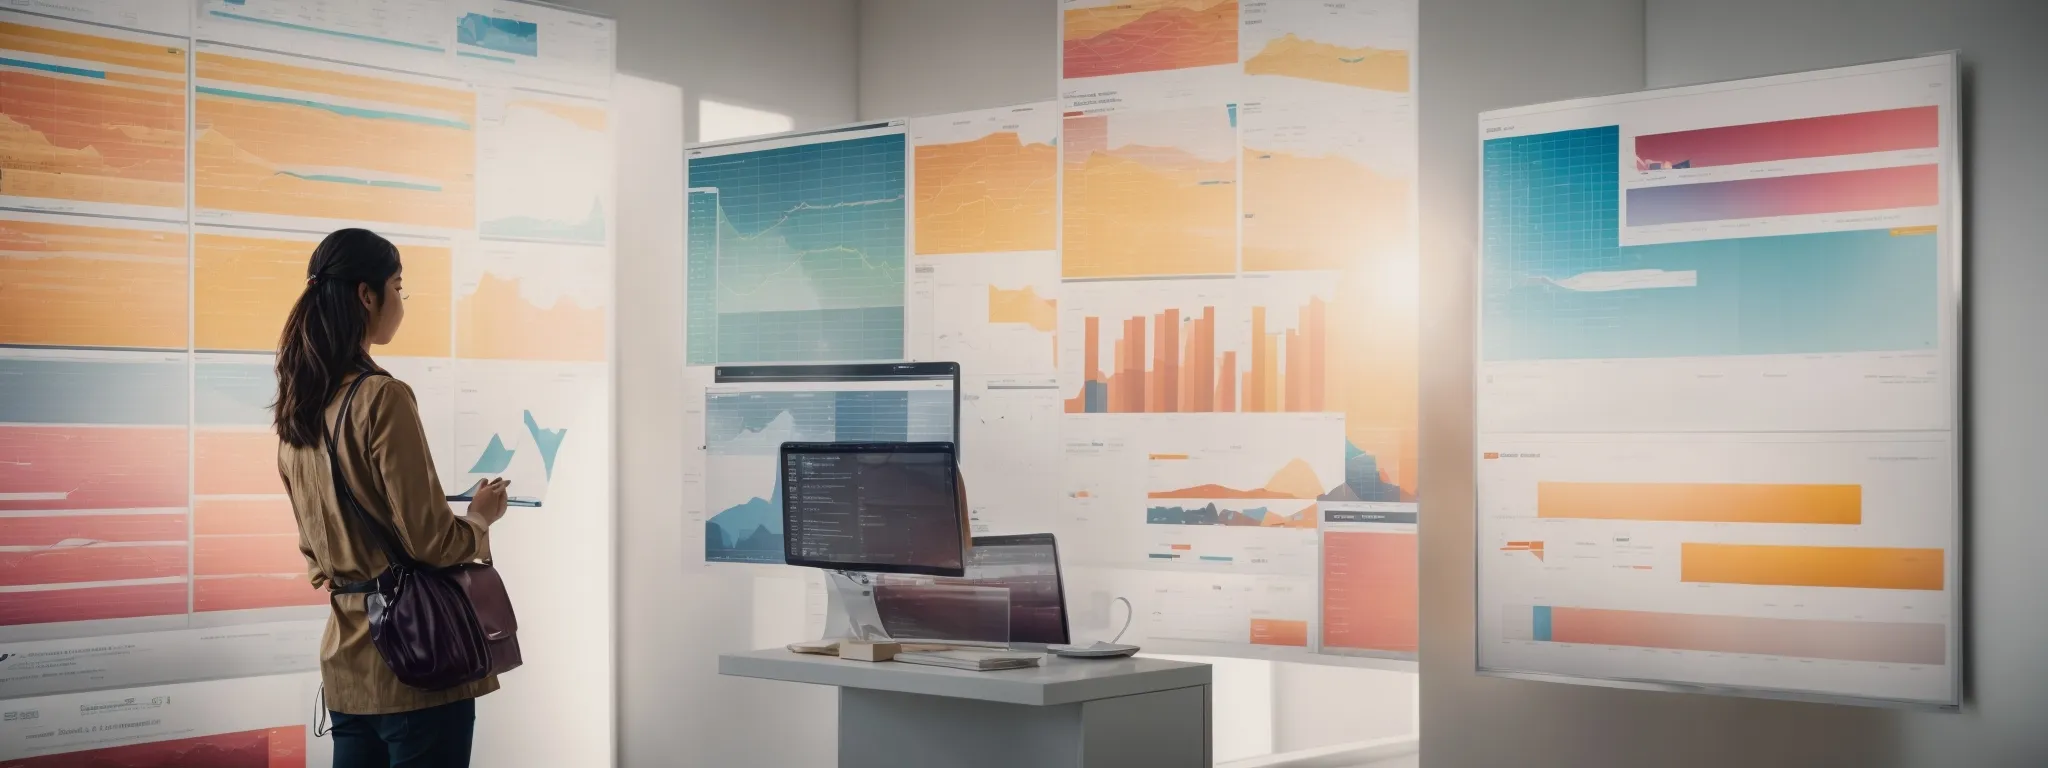 a marketer analyzing graphs and charts beside a vibrant and aesthetically appealing advertisement display.